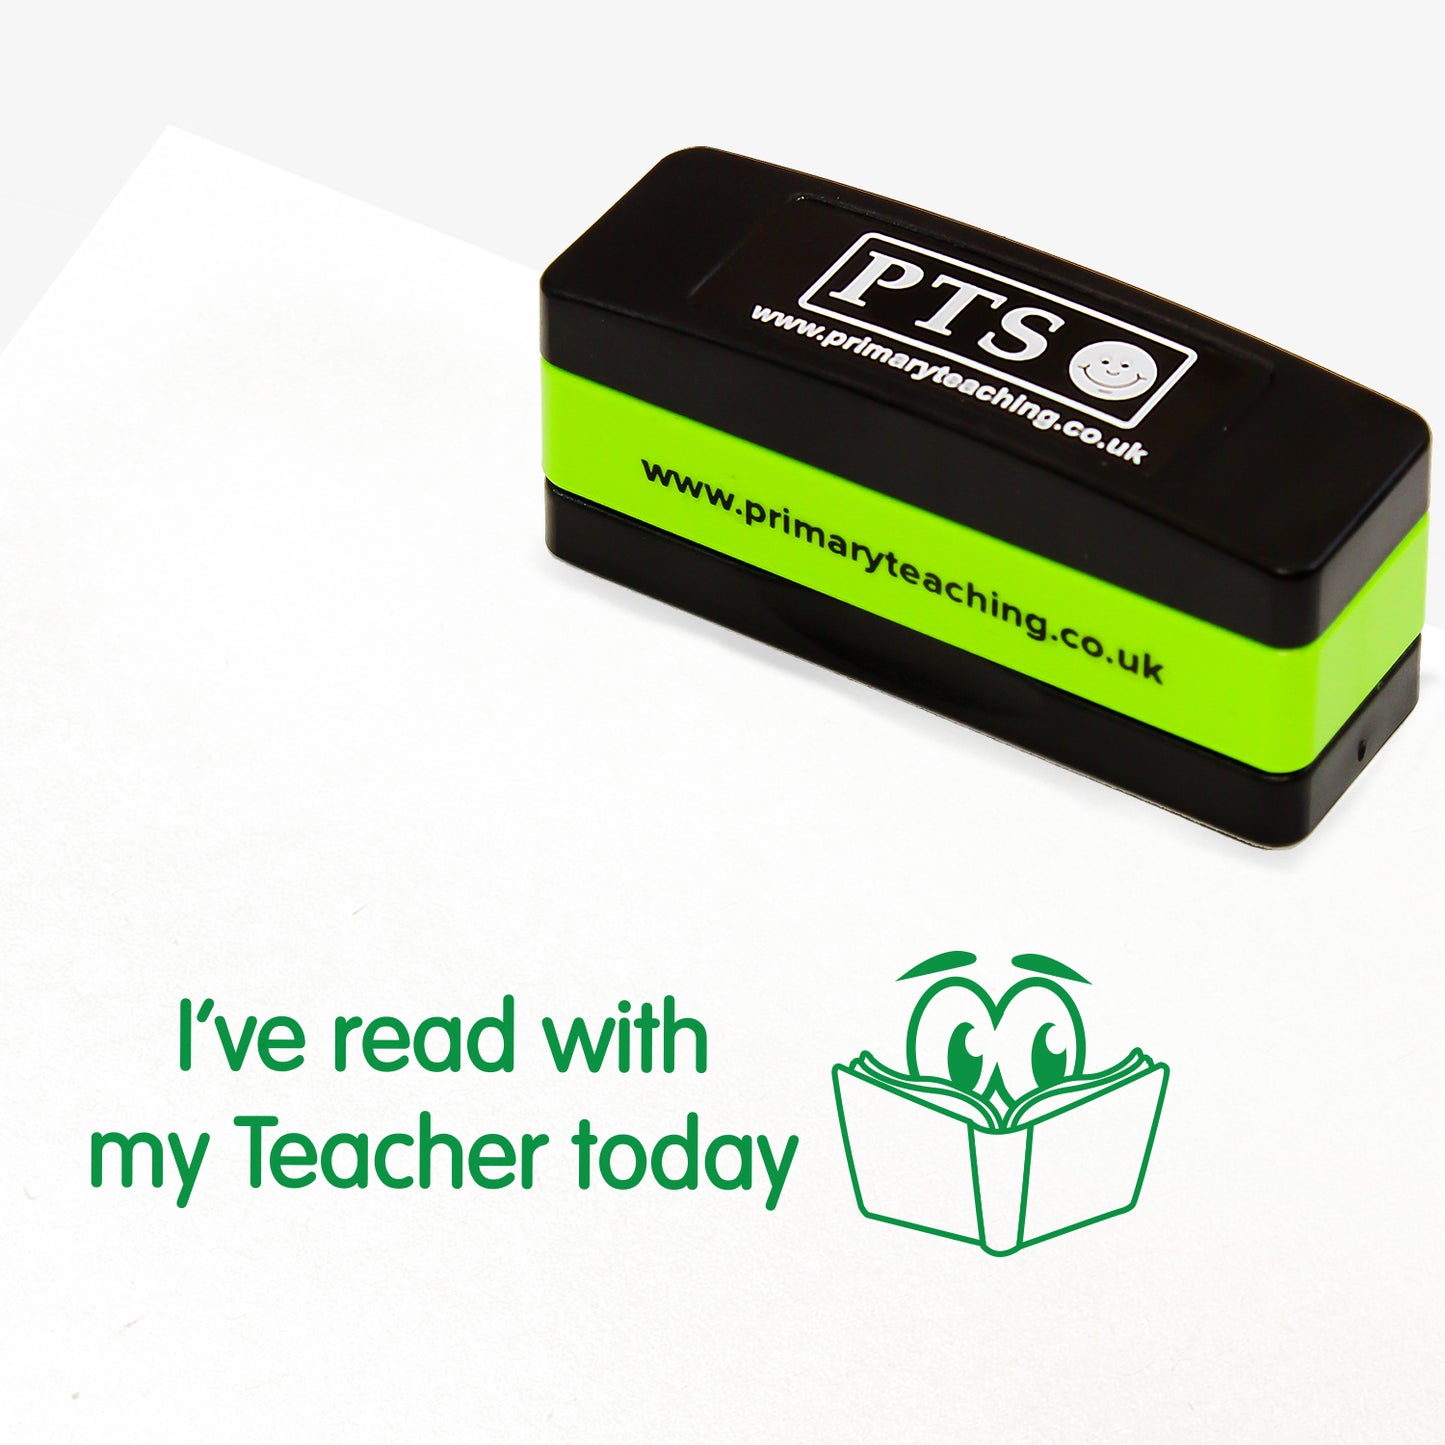 I've Read With My Teacher Today Stakz Stamper - 44 x 13mm